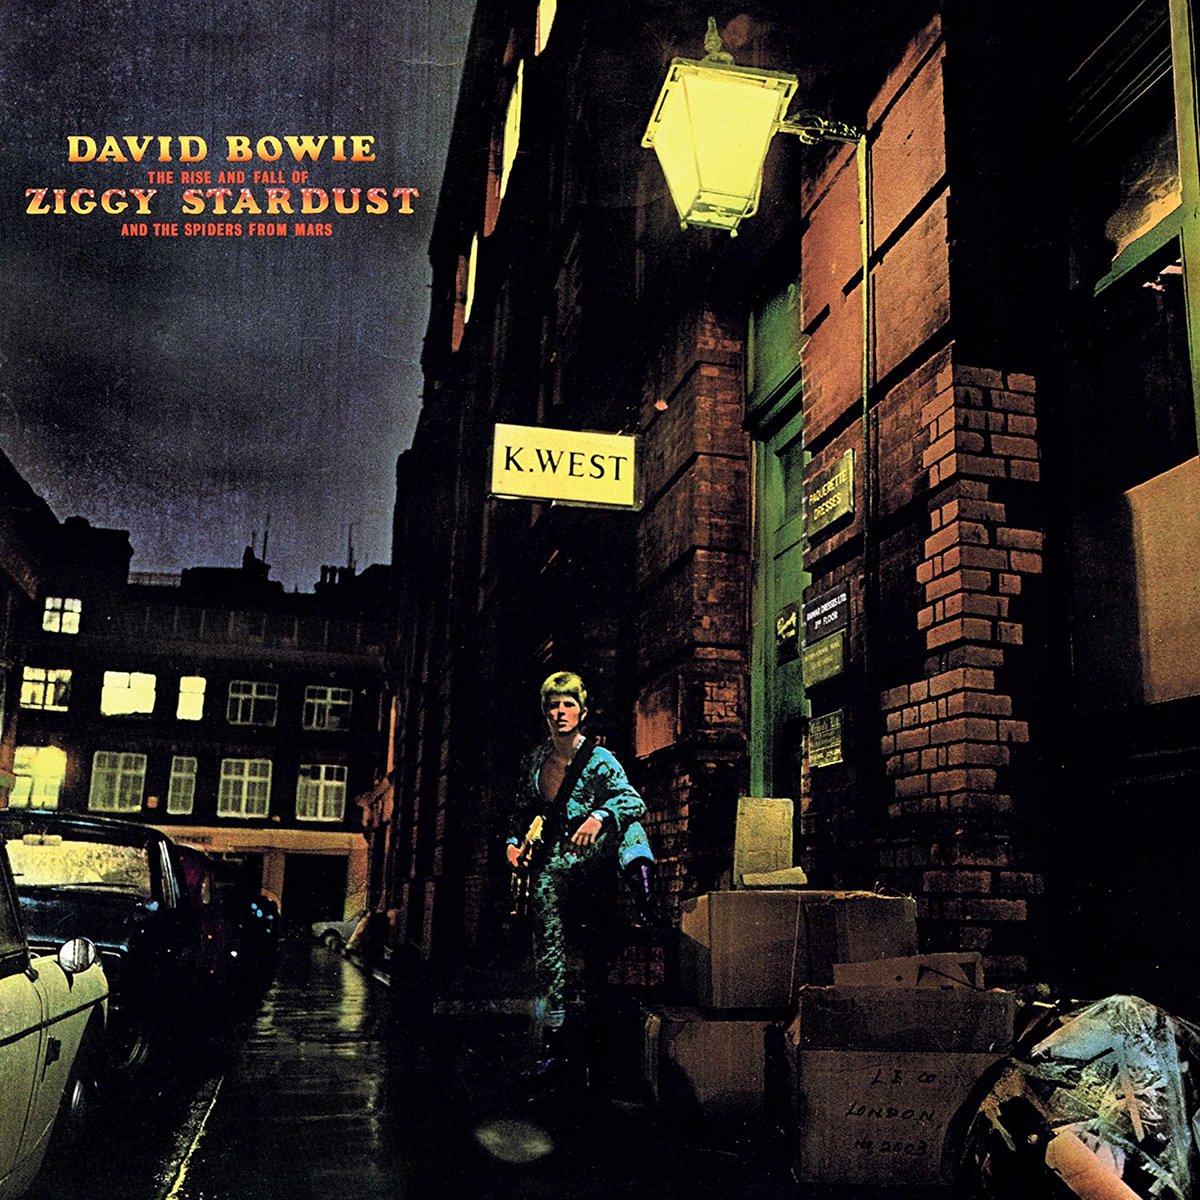 #DavidBowie  releases his classic on June 16, 1972. It’s #35 on Rolling Stone’s 500 Greatest Albums of All Time. Wham bam, thank you ma’am. #70srock #70smusic #classicrock #ZIGGYSTARDUST robinbannks.wordpress.com/2023/06/16/let…